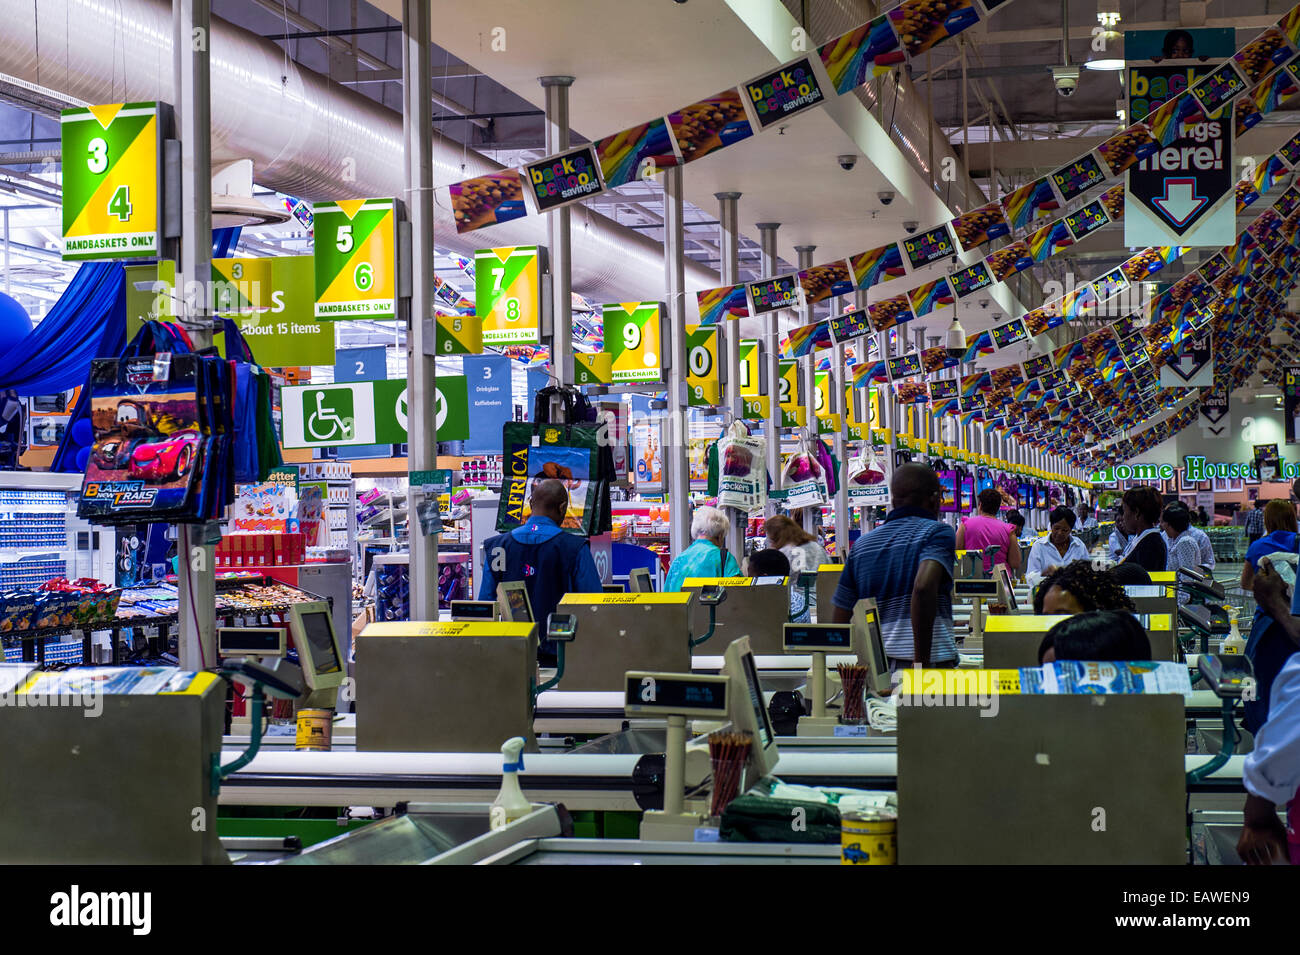 An enormous row of check-out cash registers in a supermarket mall. Stock Photo